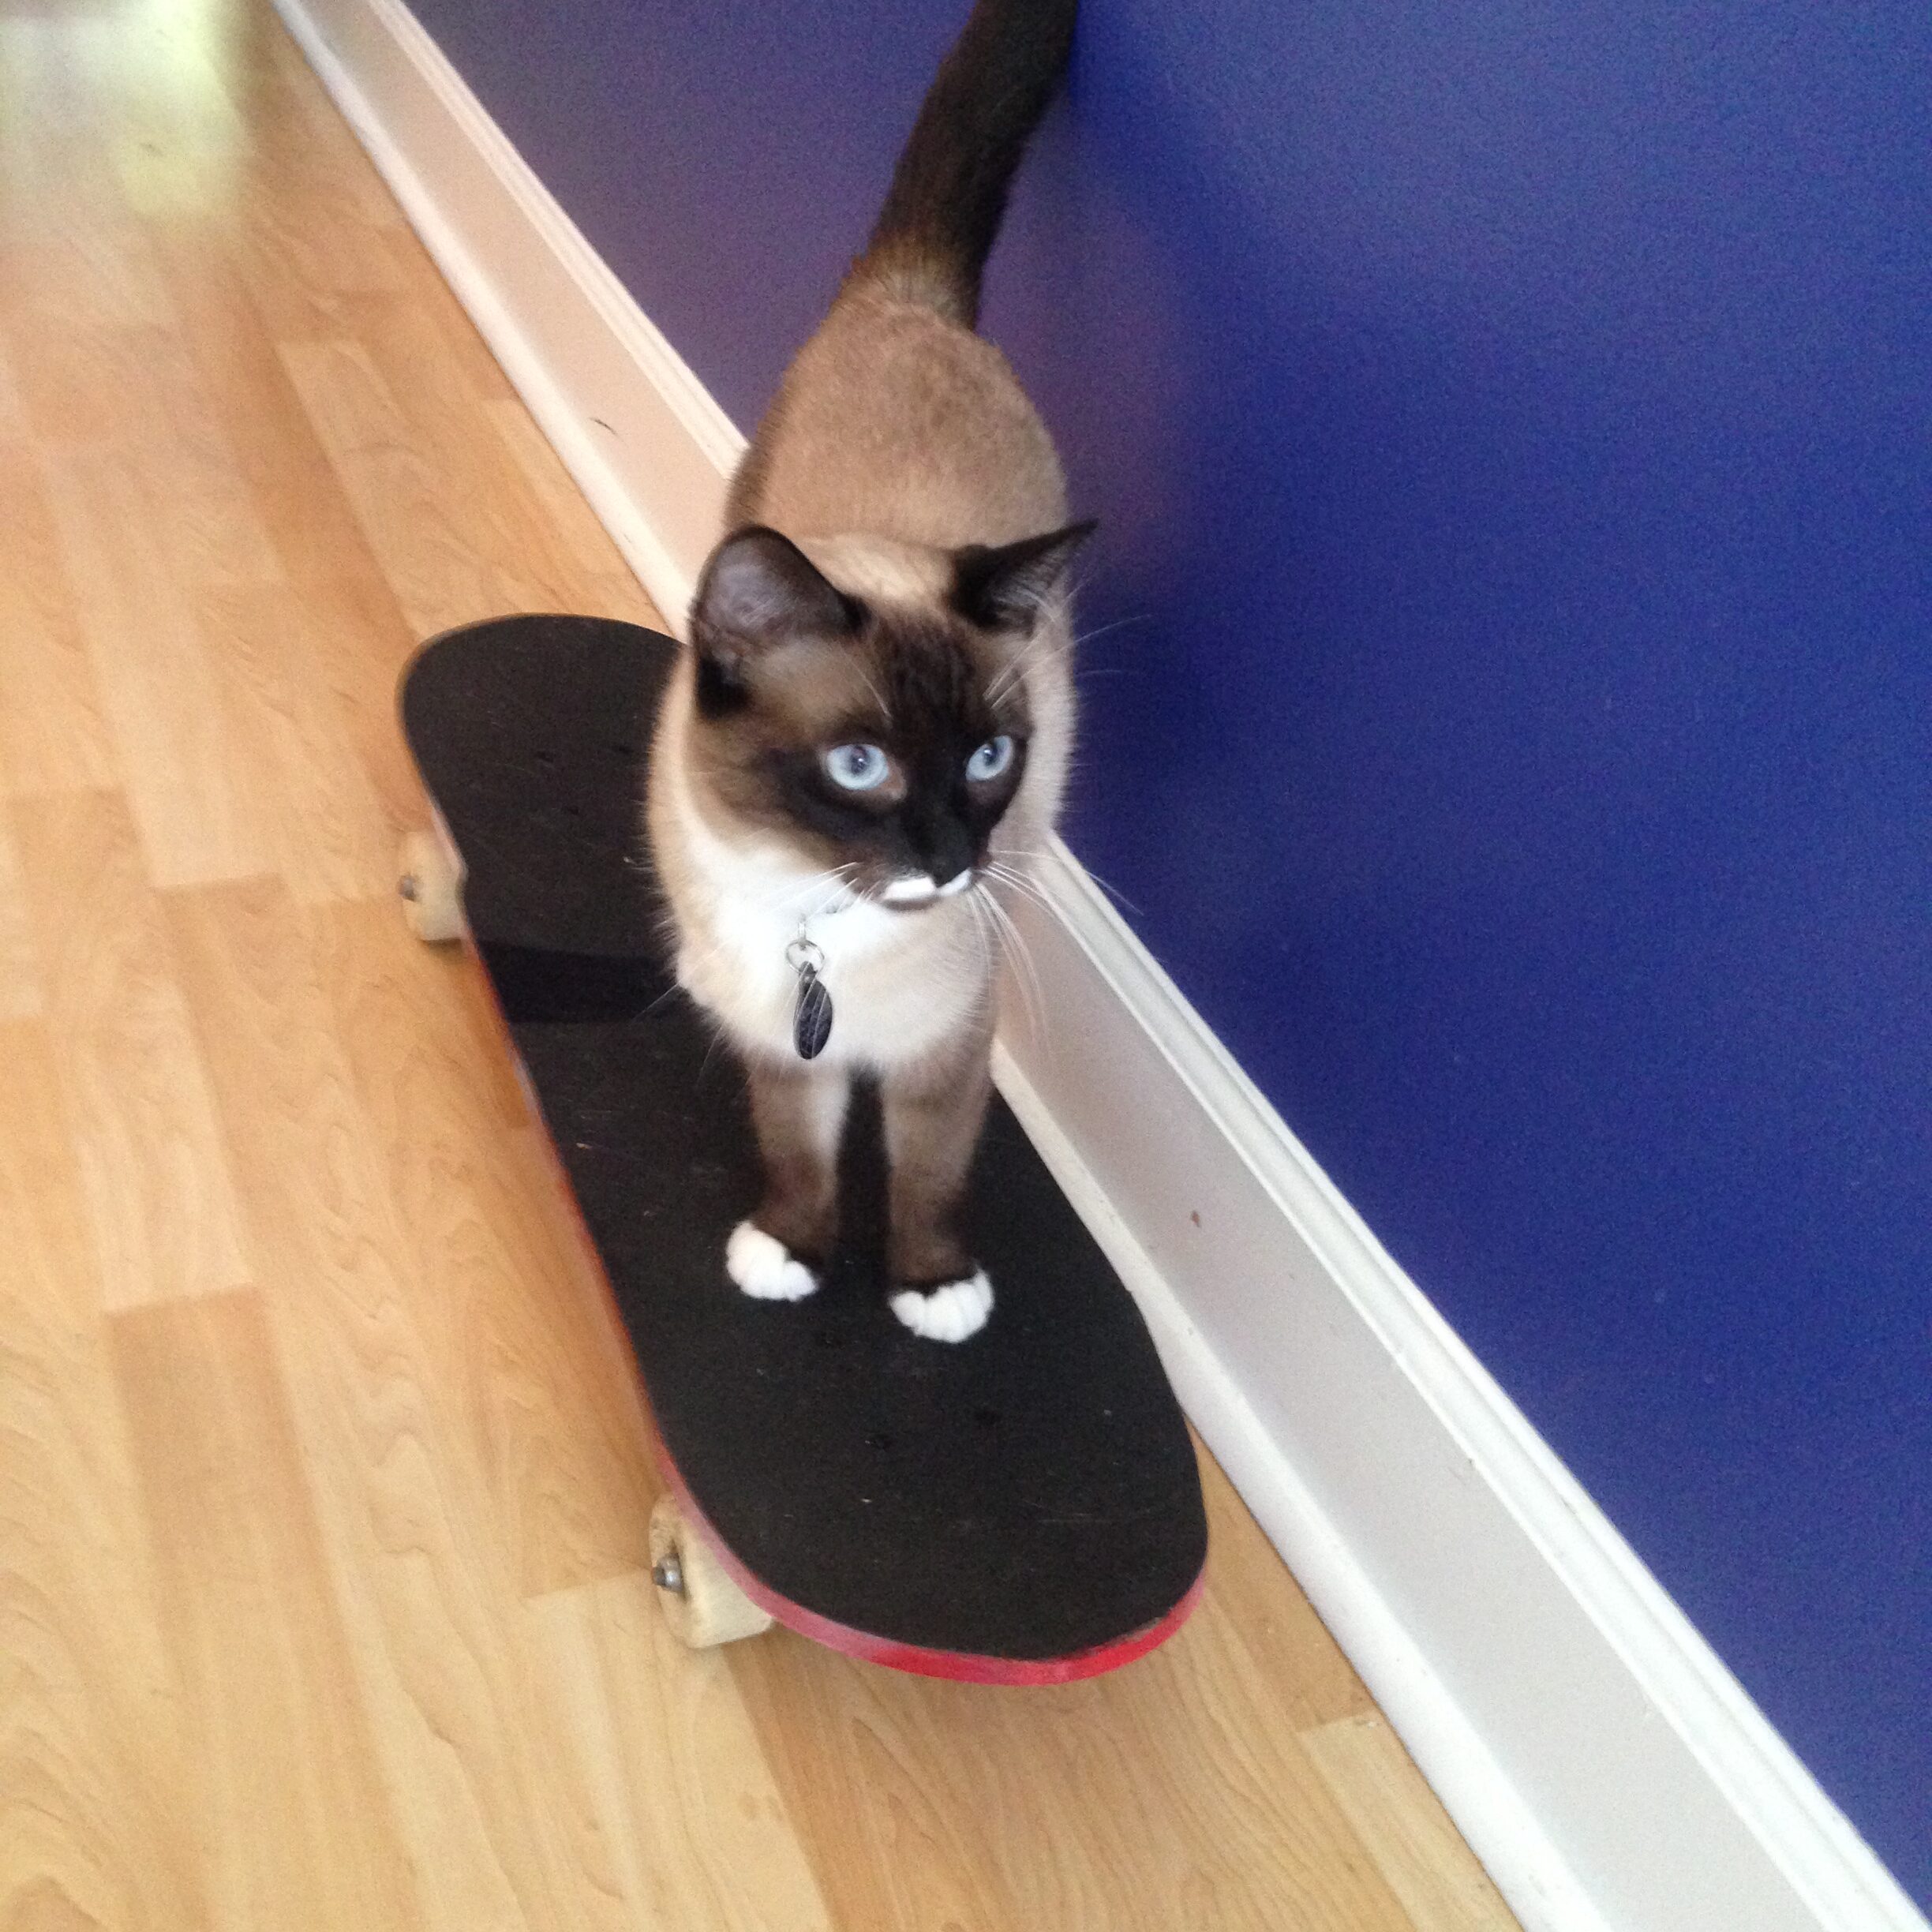 Willow cruisin' on her skateboard. Ingrid has taught many cats to skate!